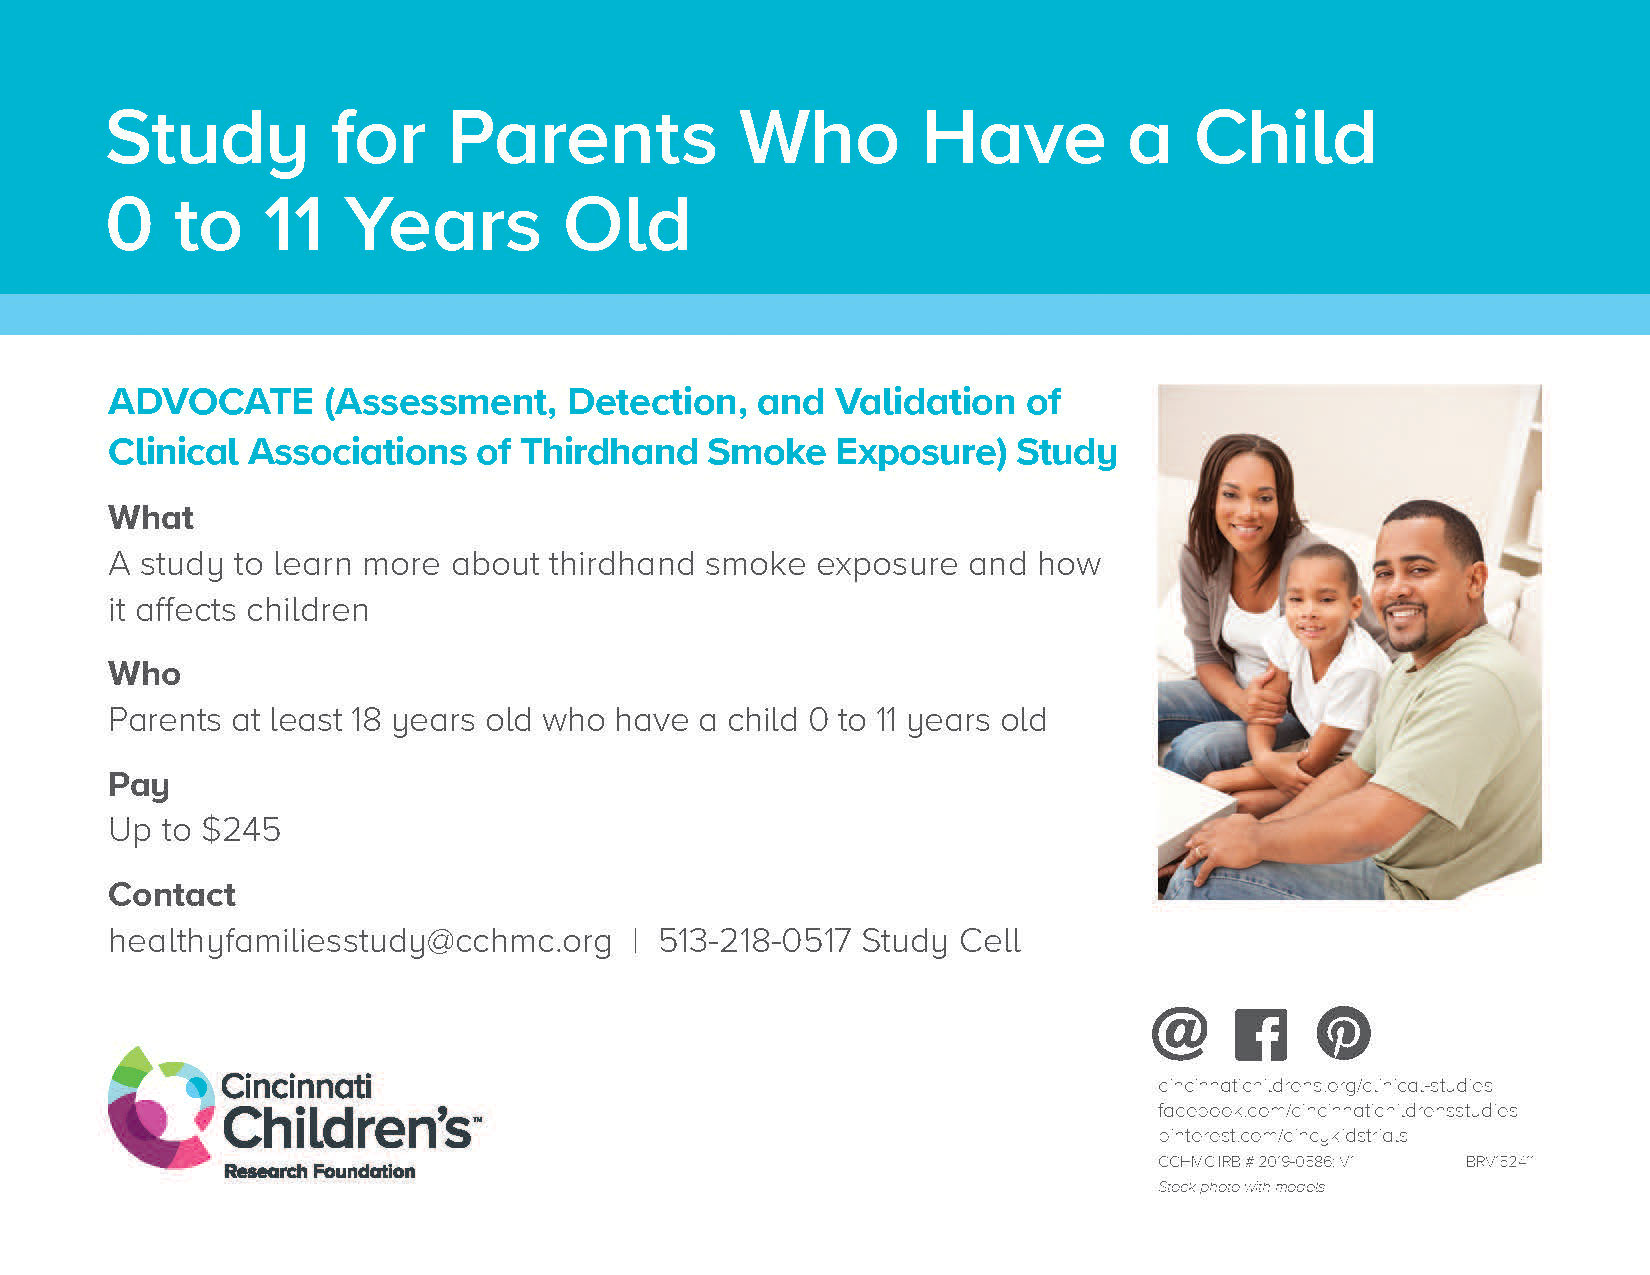 Study trial flyer for parents who have a child 0 to 11 years old